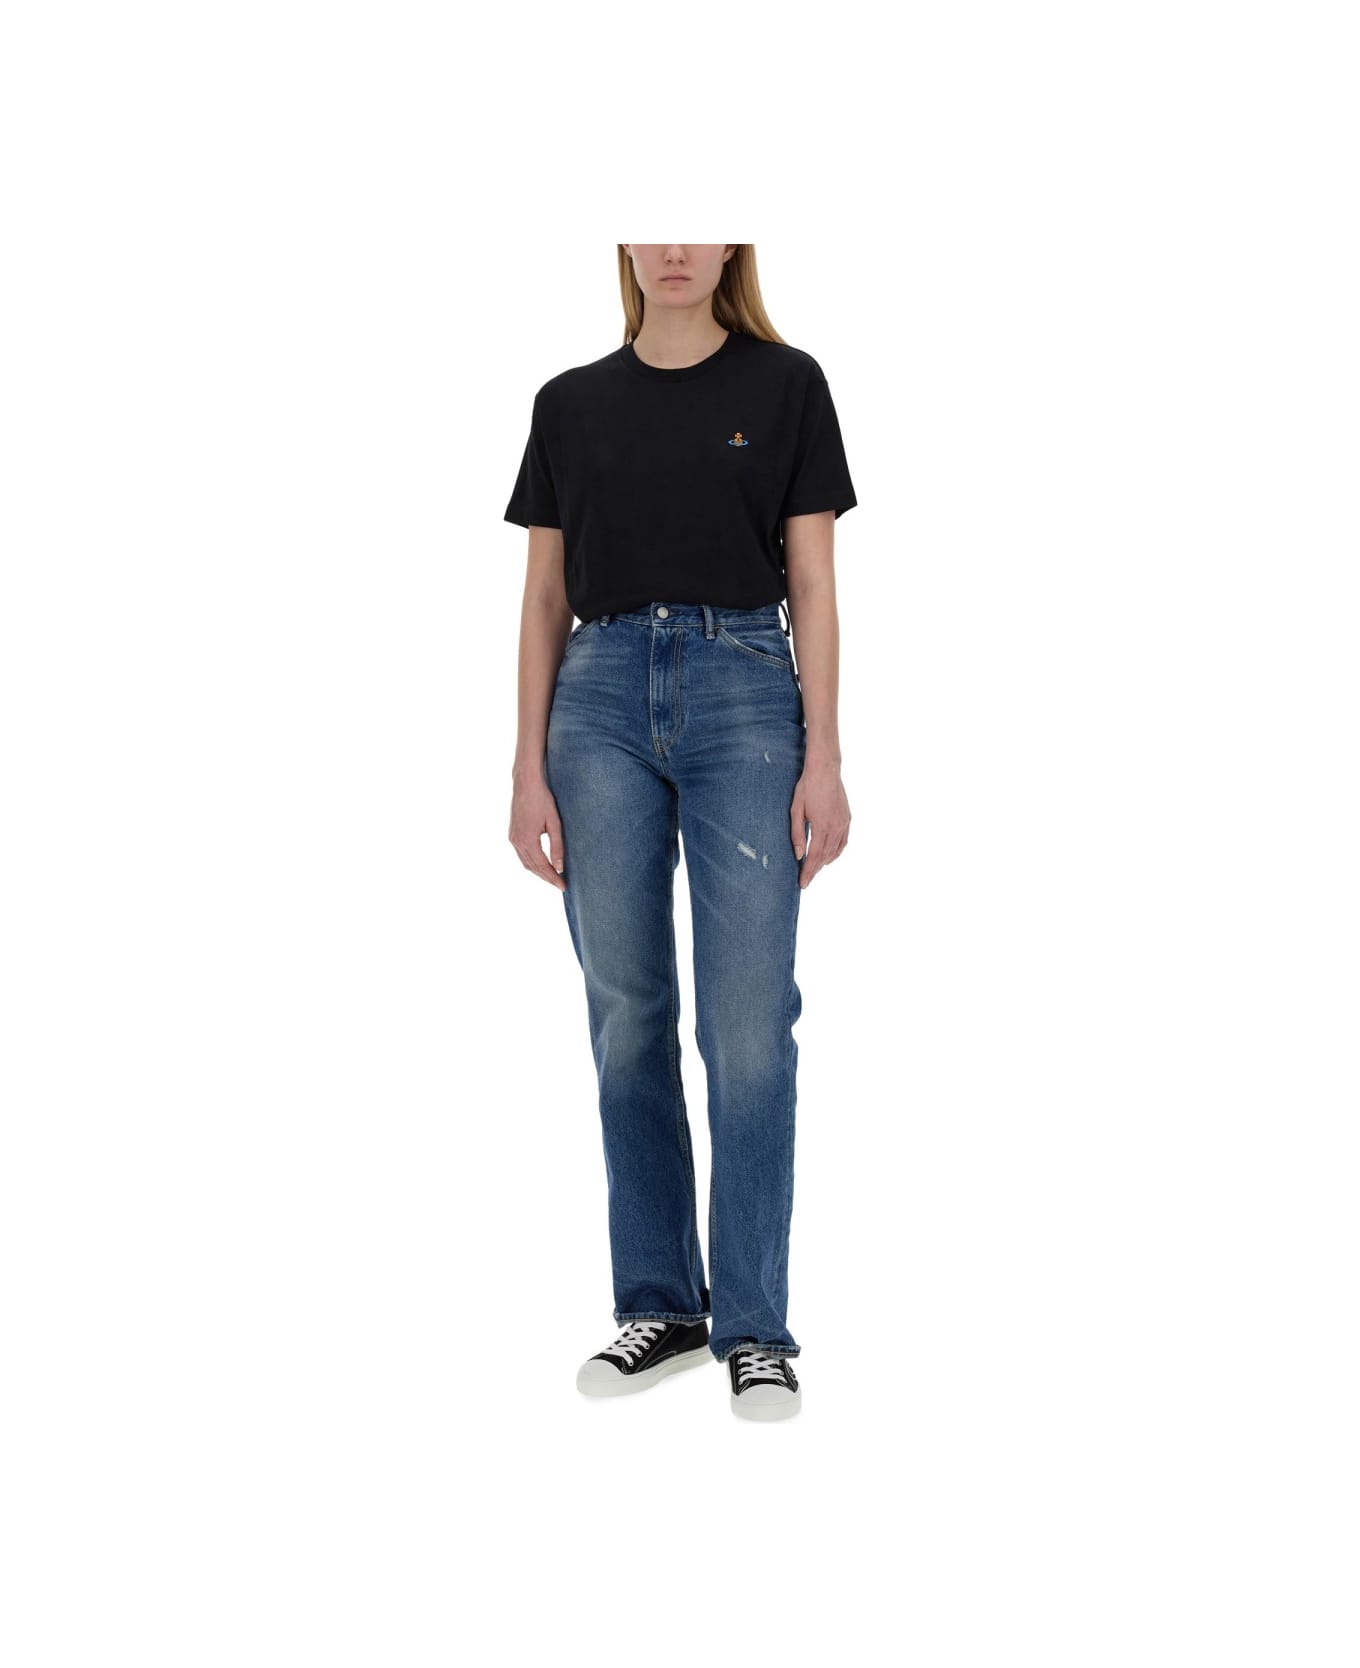 Vivienne Westwood T-shirt With Orb Embroidery - BLACK